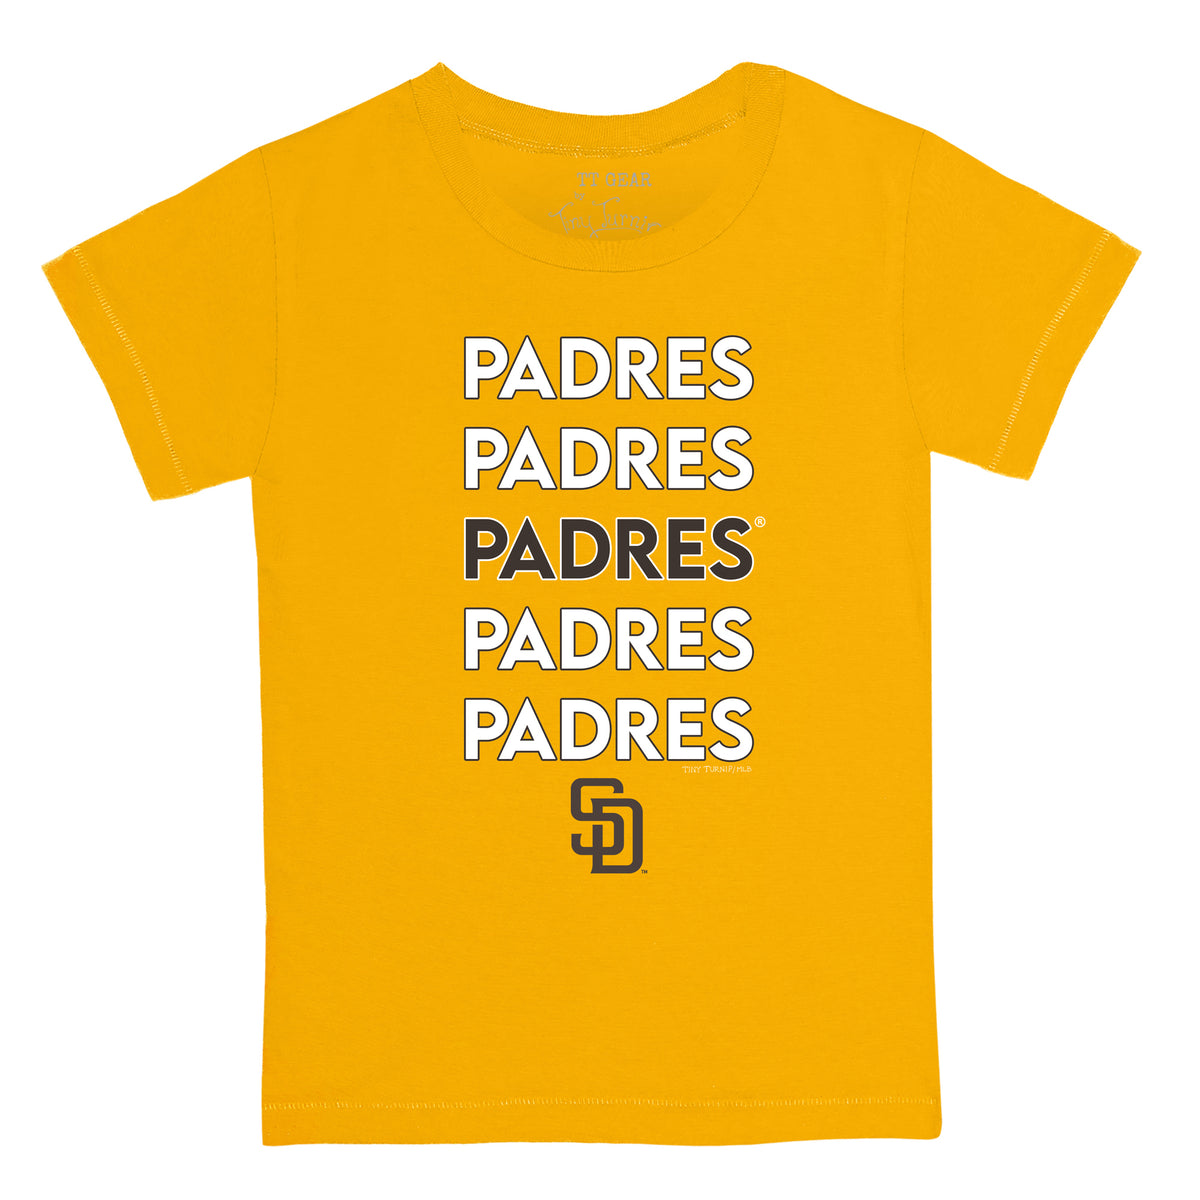 San Diego Padres State Outline Tee Shirt Youth Large (10-12) / Gold